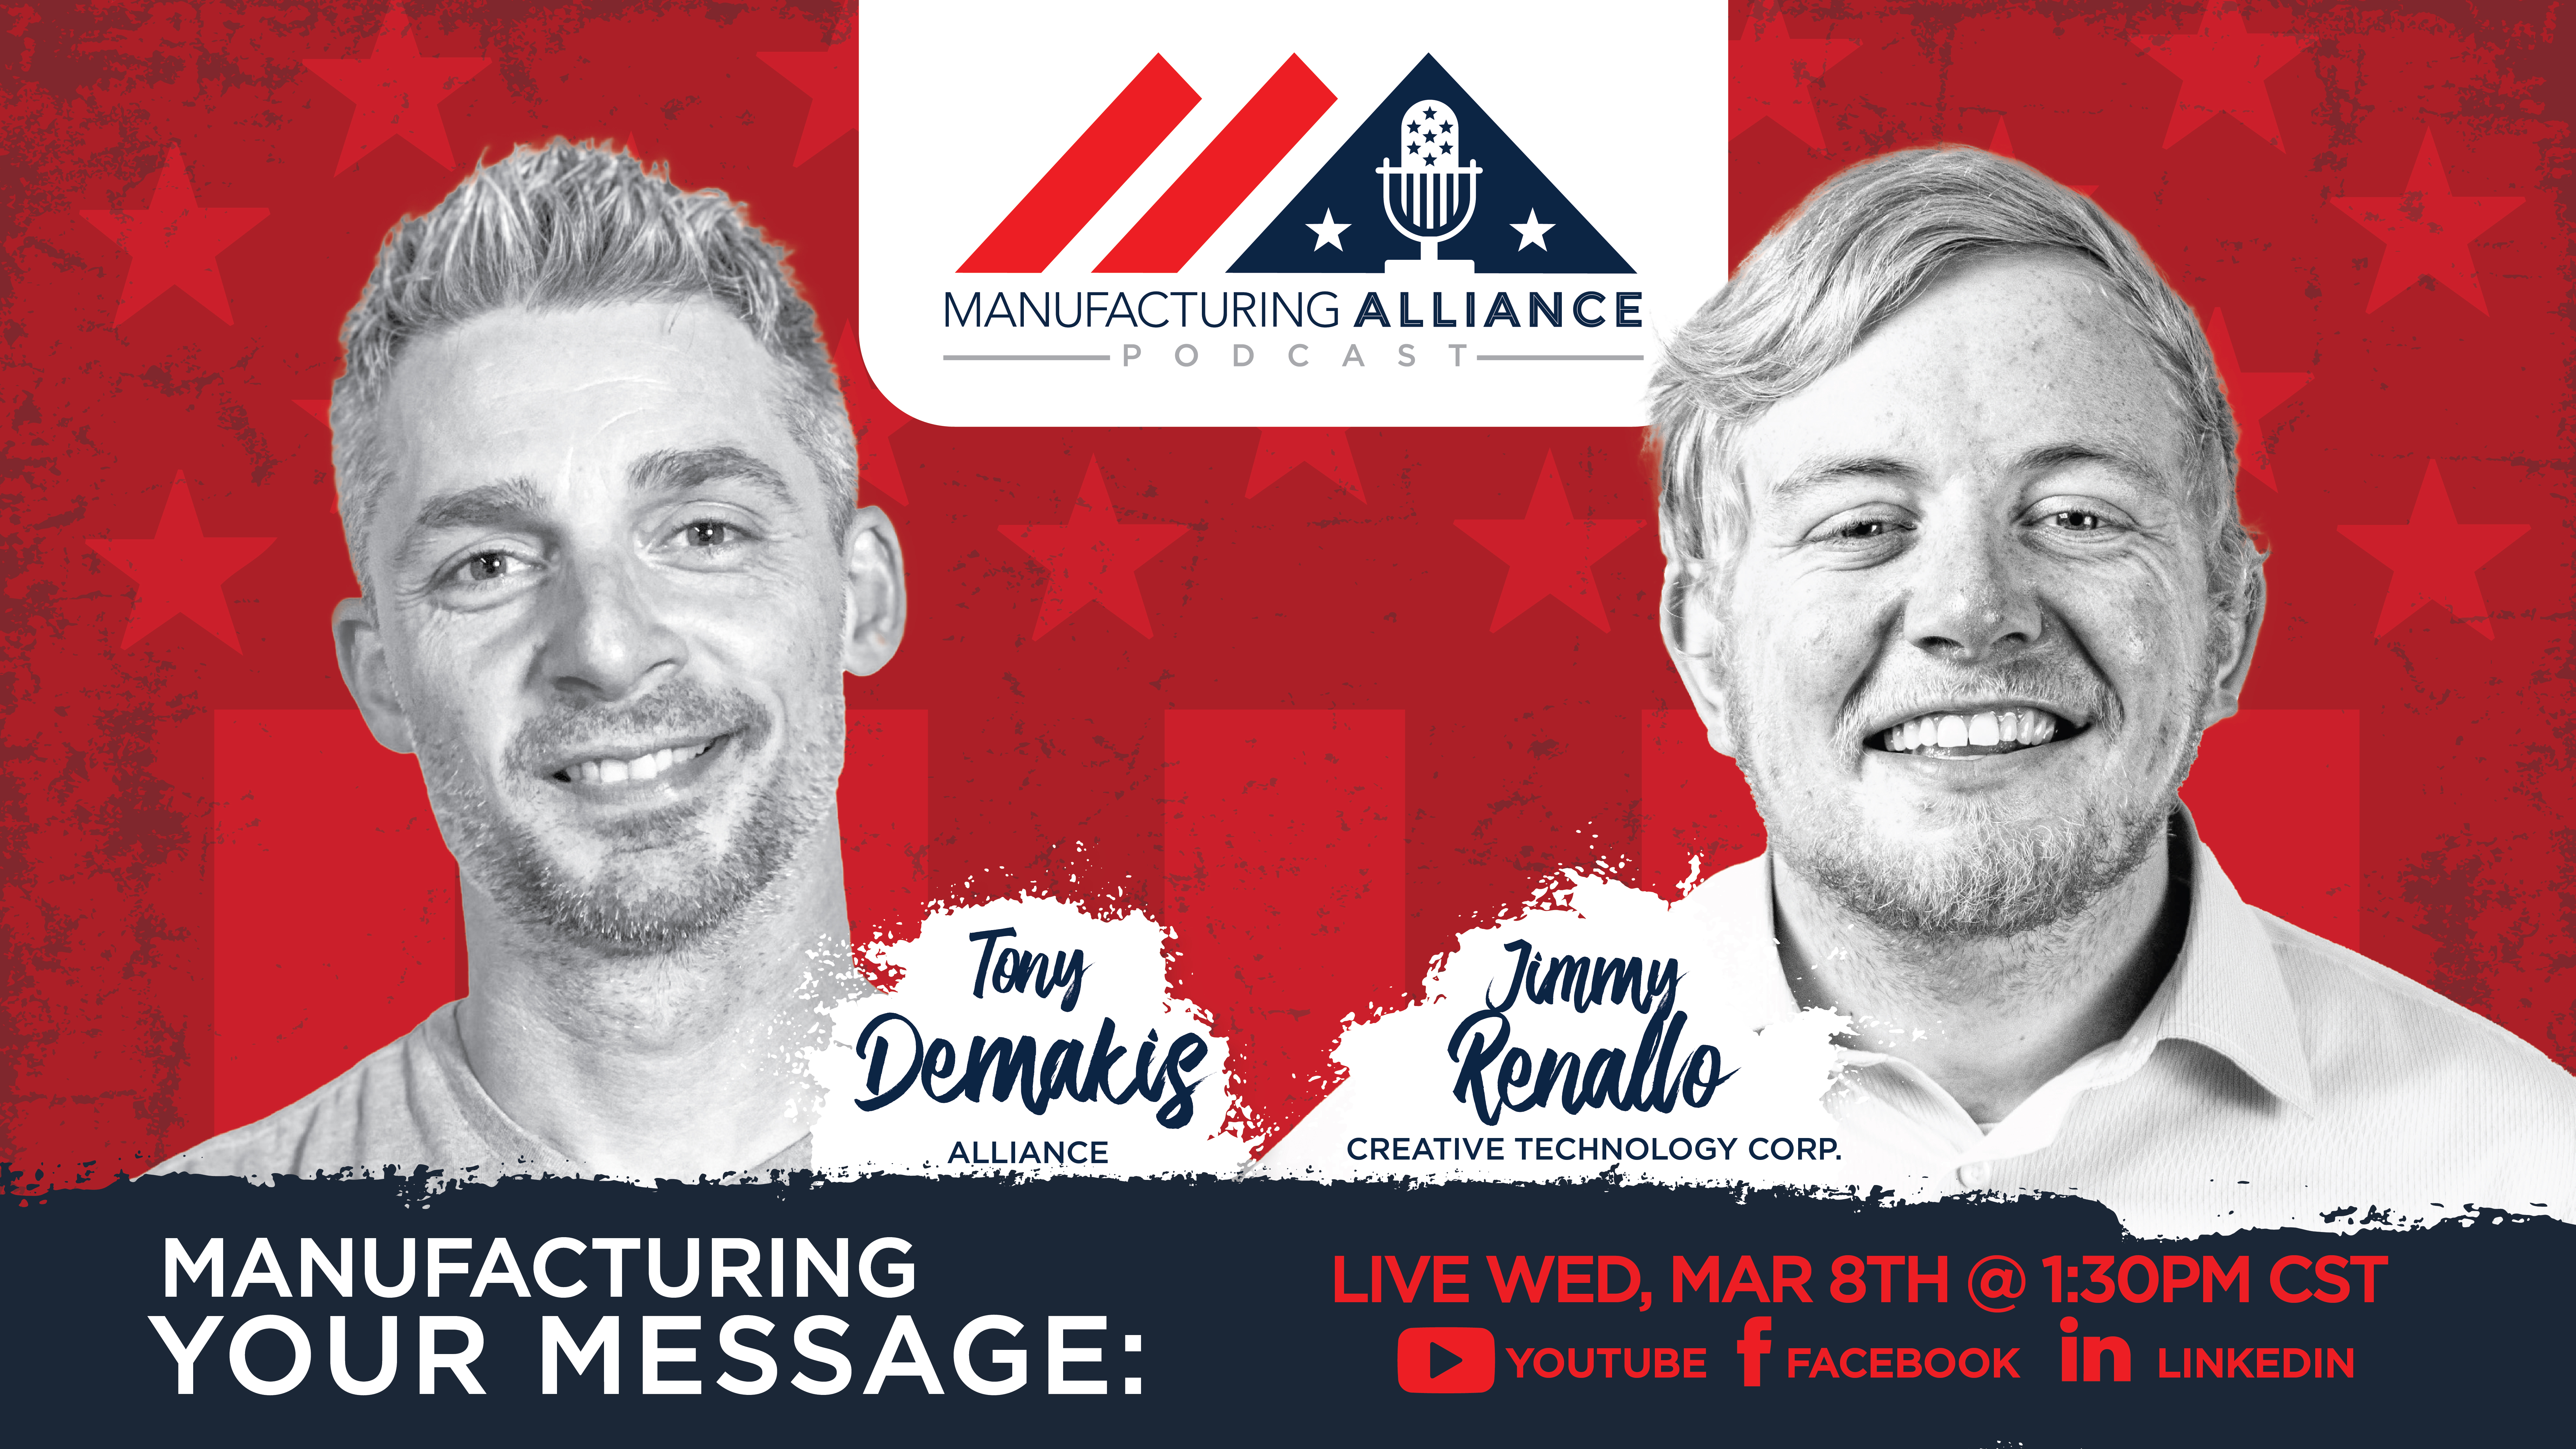 The Manufacturing Alliance Podcast Presents: Jimmy Renallo | Creative Technology Corp. – Part 2